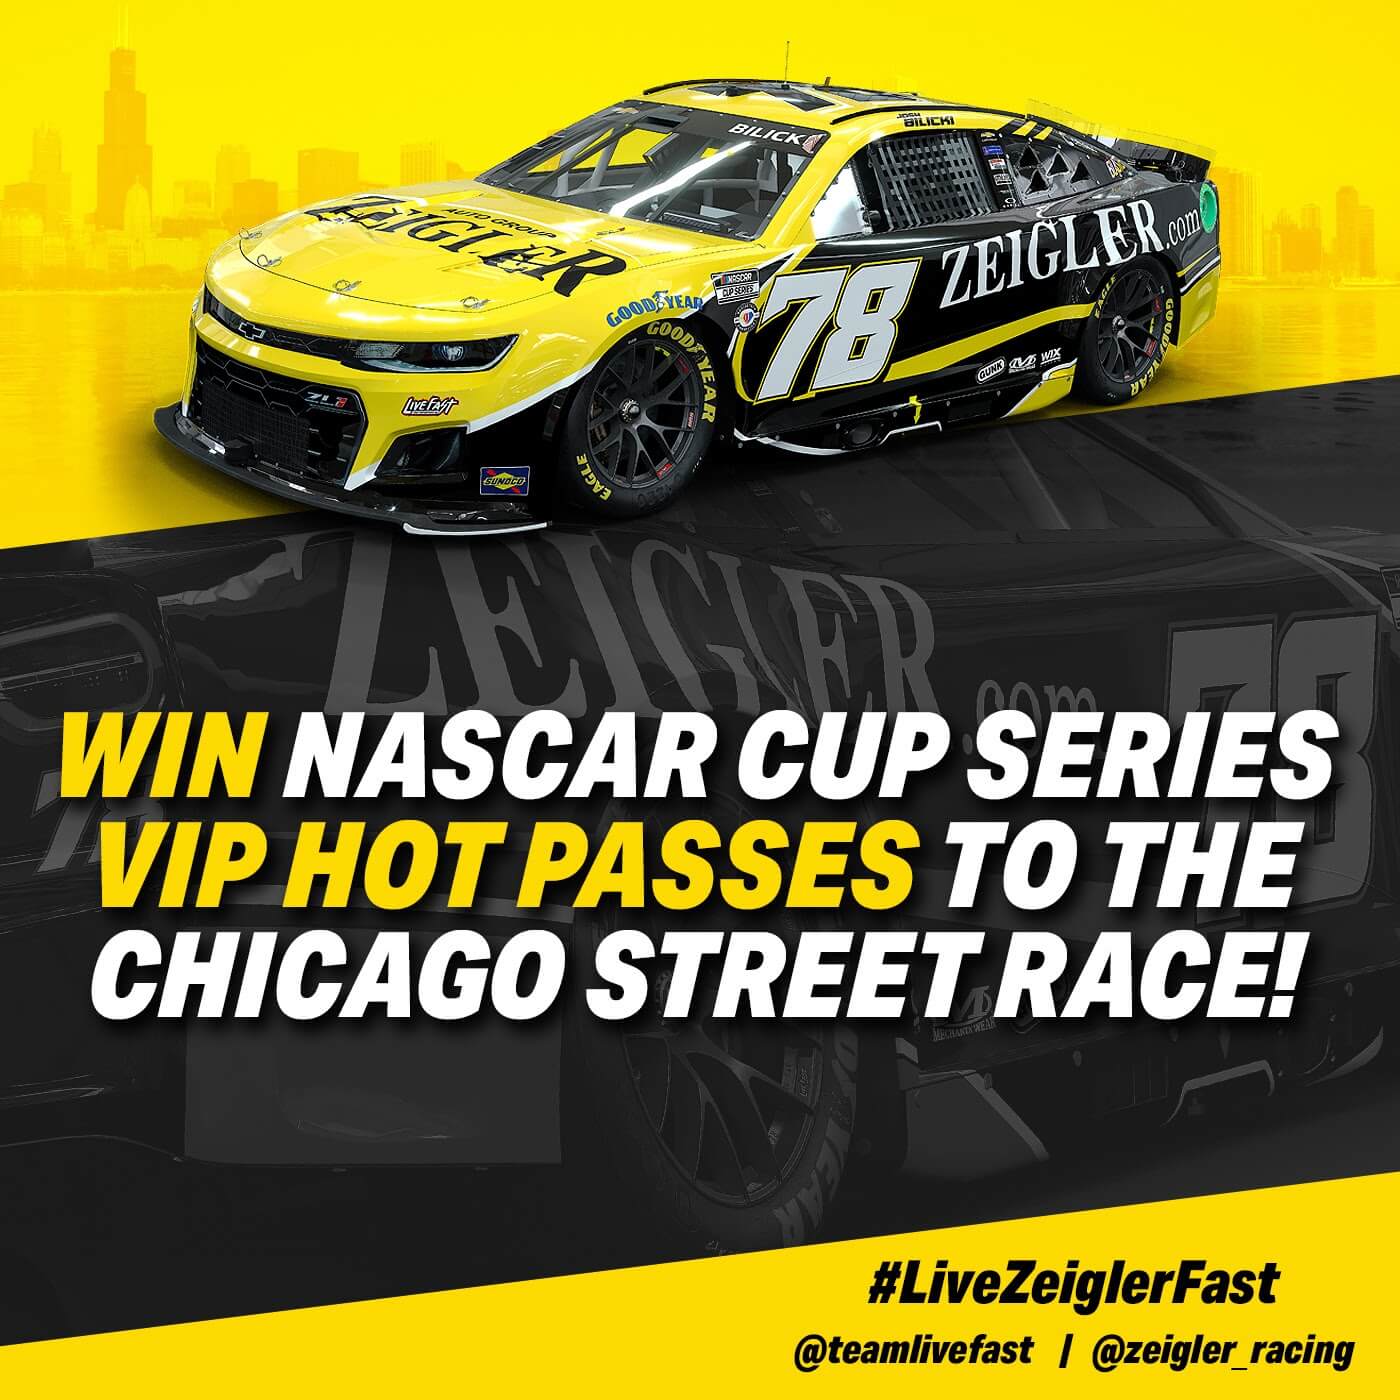 Enter Now to Win VIP Hot Passes to Chicago Street Race with Zeigler Racing/Zeigler Auto Group and Live Fast Motorsports #LiveZeiglerFast Contest Catchfence